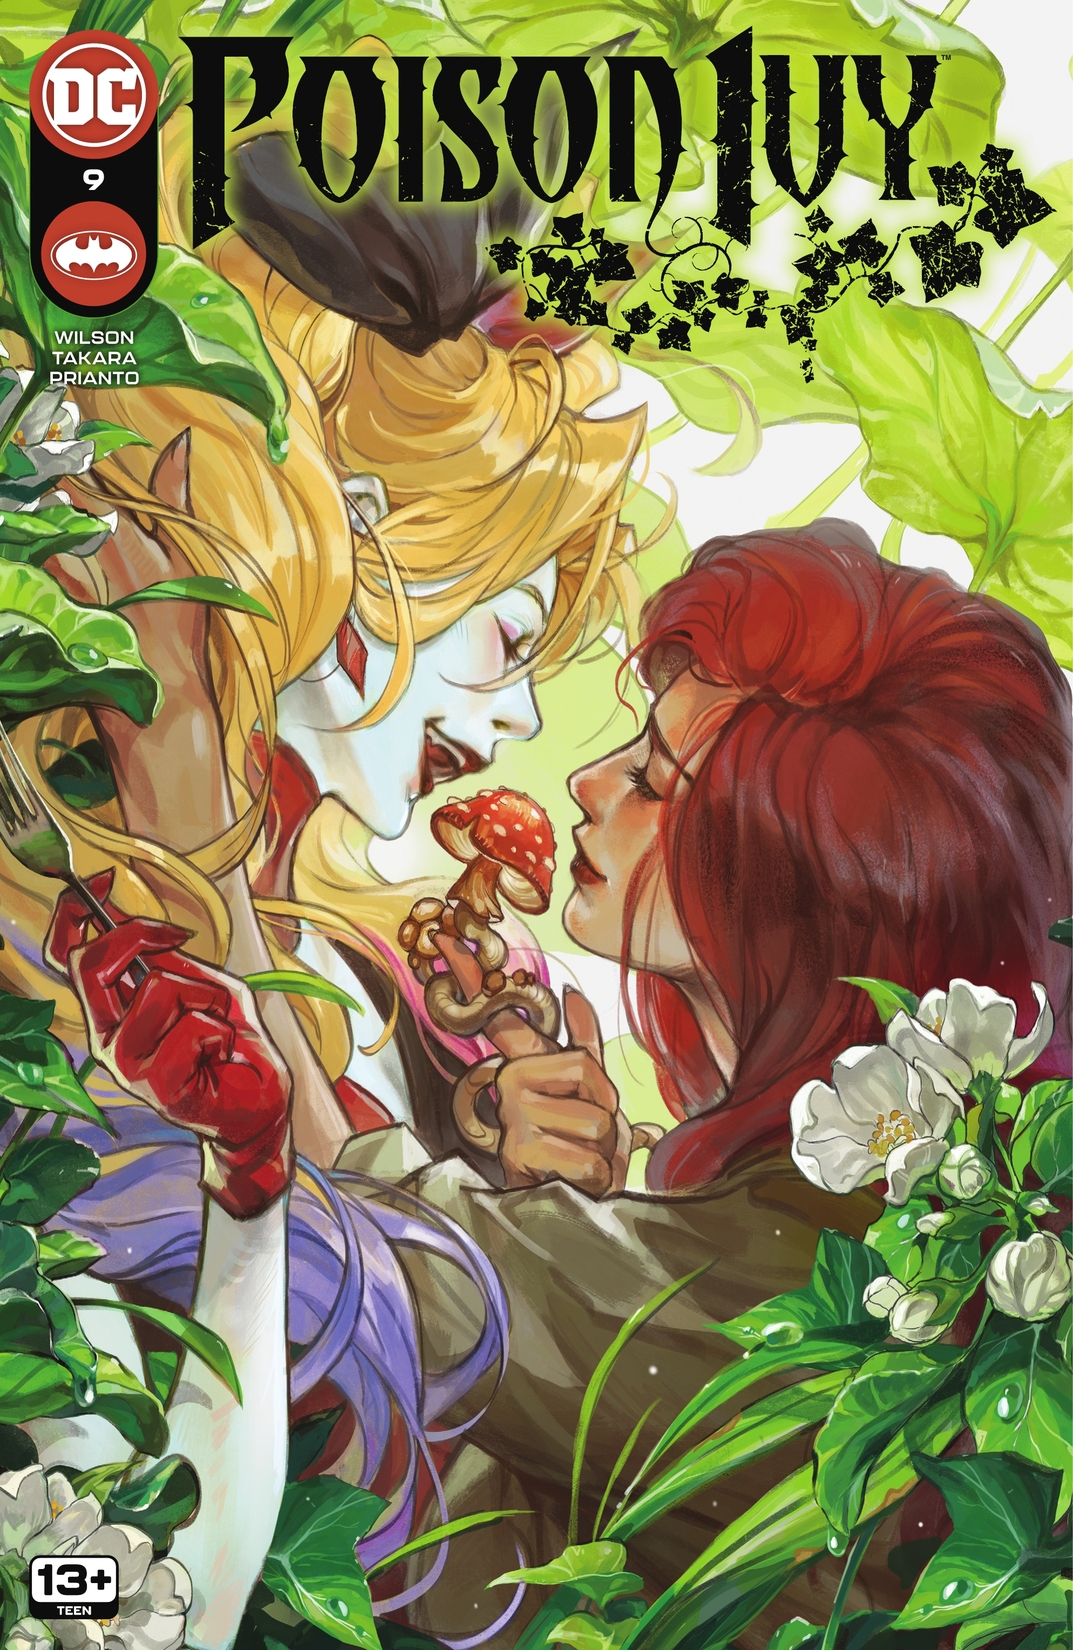 Poison Ivy #9 preview images